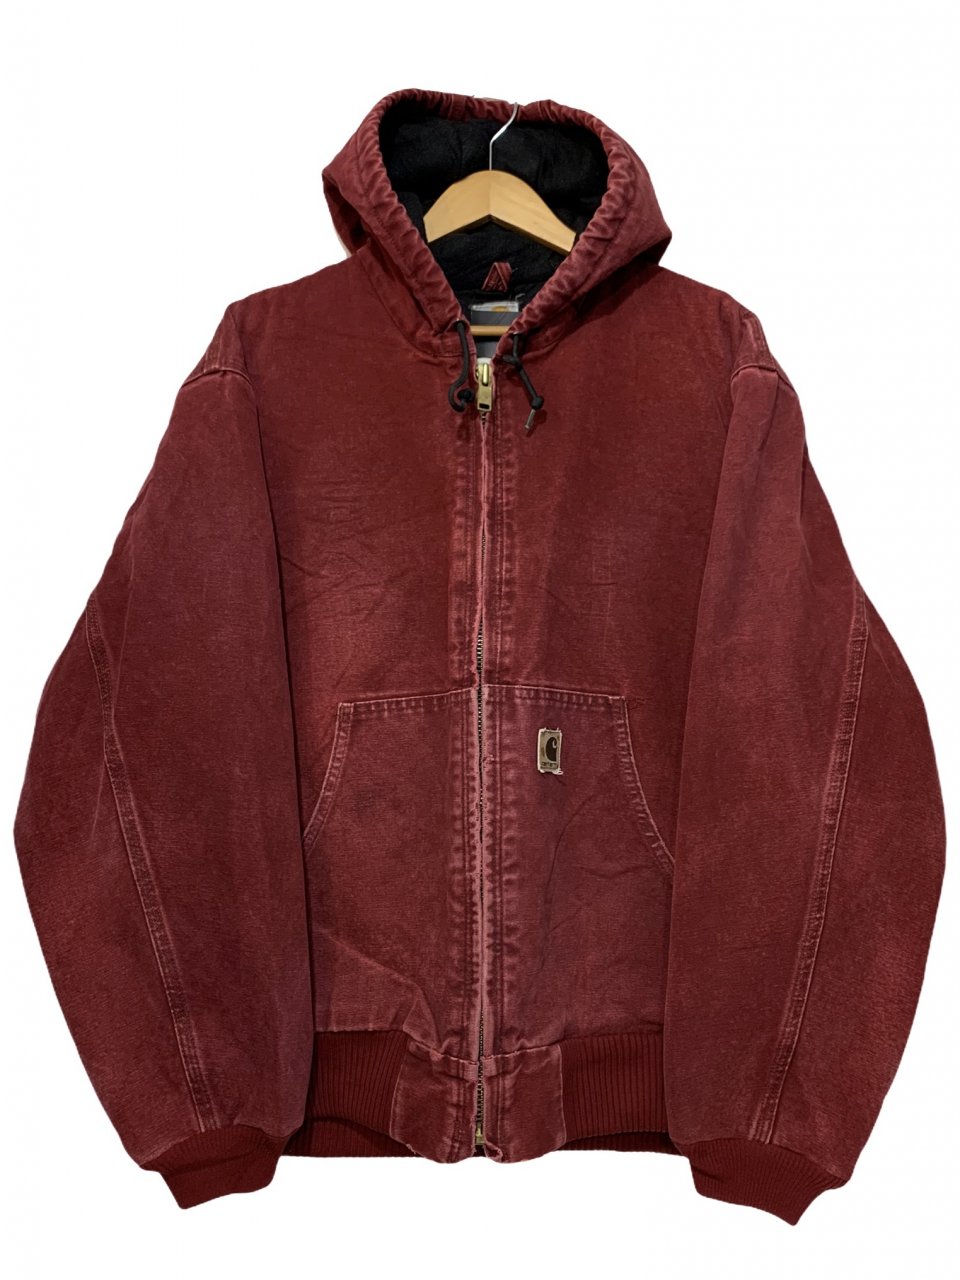 Carhartt Quilted Flannel Lined Active Jacket エンジ L カーハート